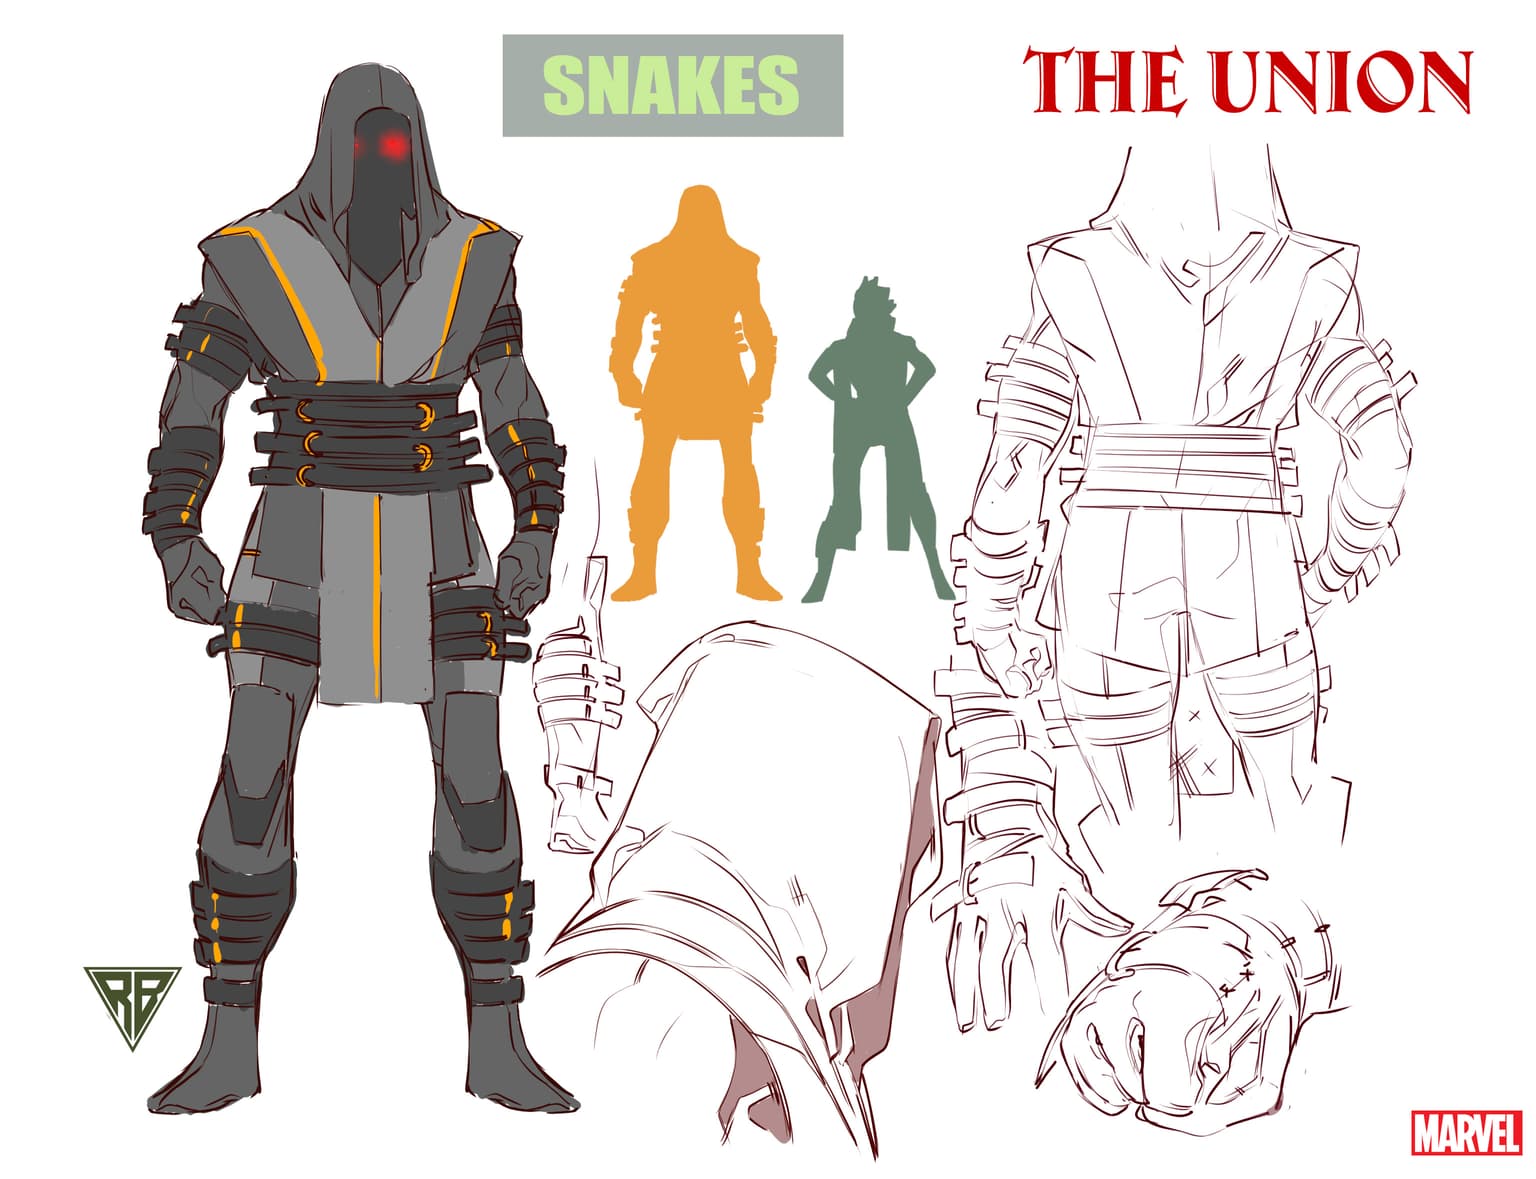 Snakes character design by R.B. Silva